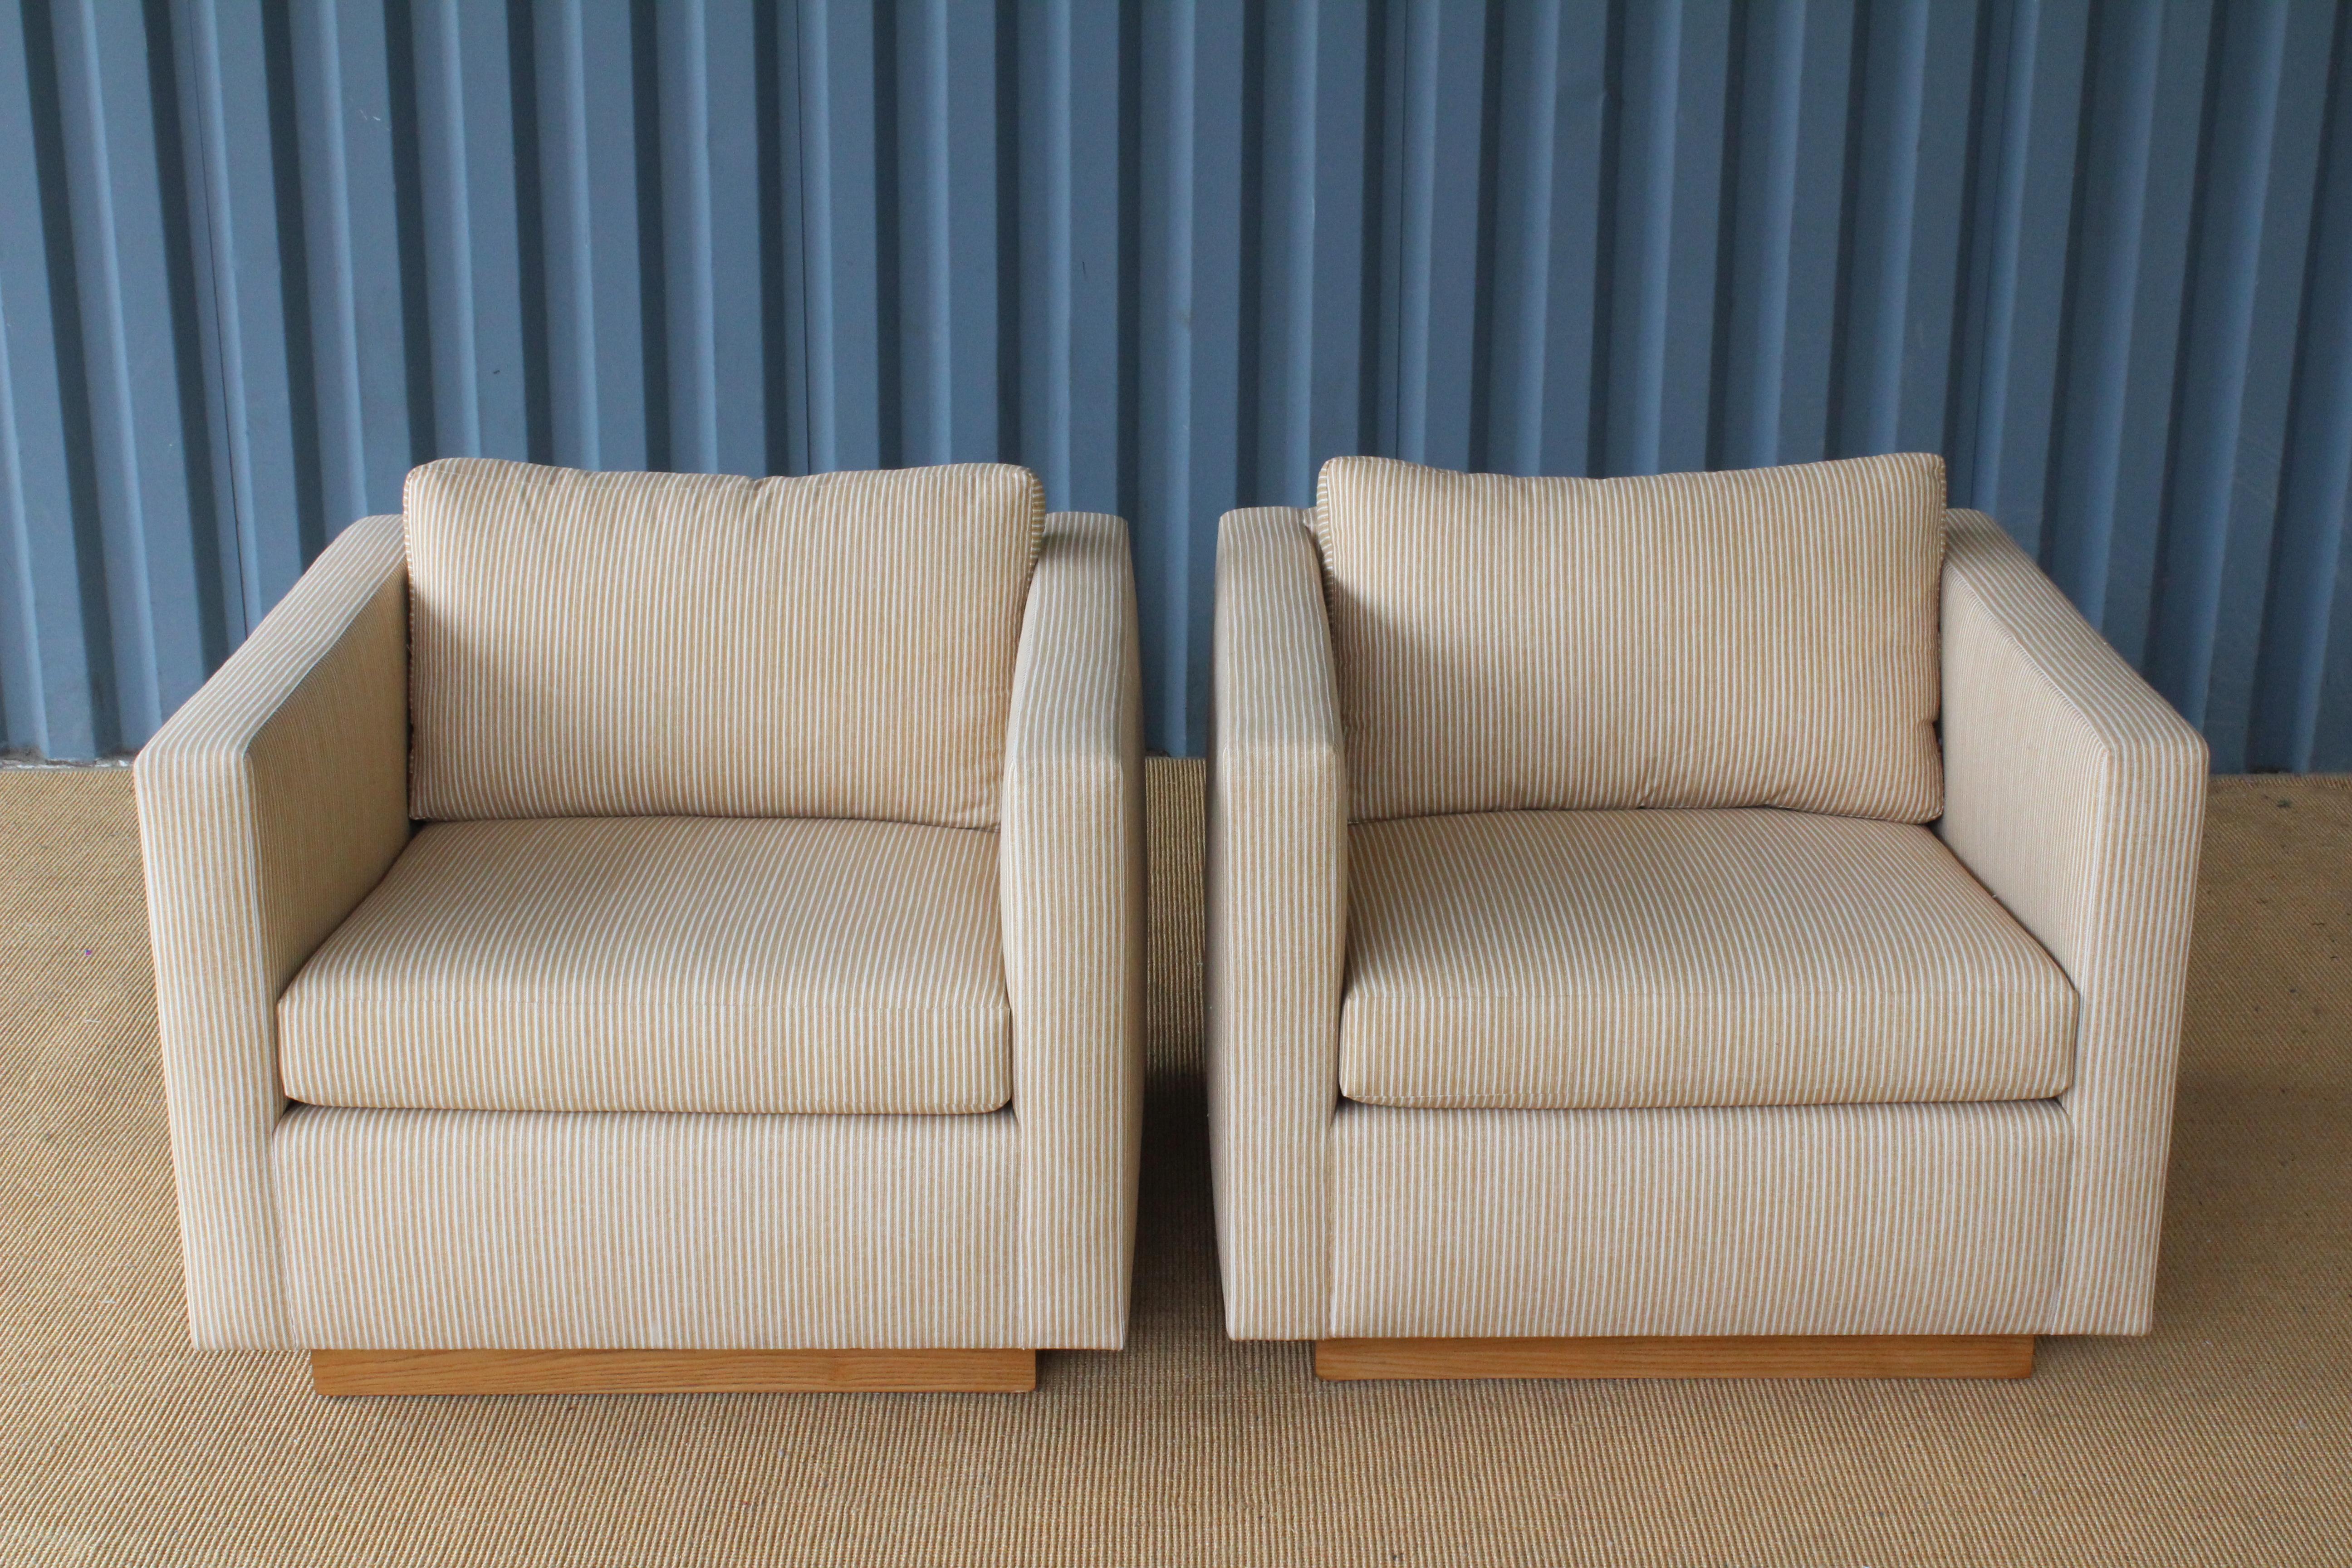 Pair of 1960s armchairs designed by Edward Axel Roffman. The pair have been reupholstered in an English cotton 'Poulton Stripe' fabric by Fermoie. They sit on walnut plinth bases that have been refinished. Price is for the pair.